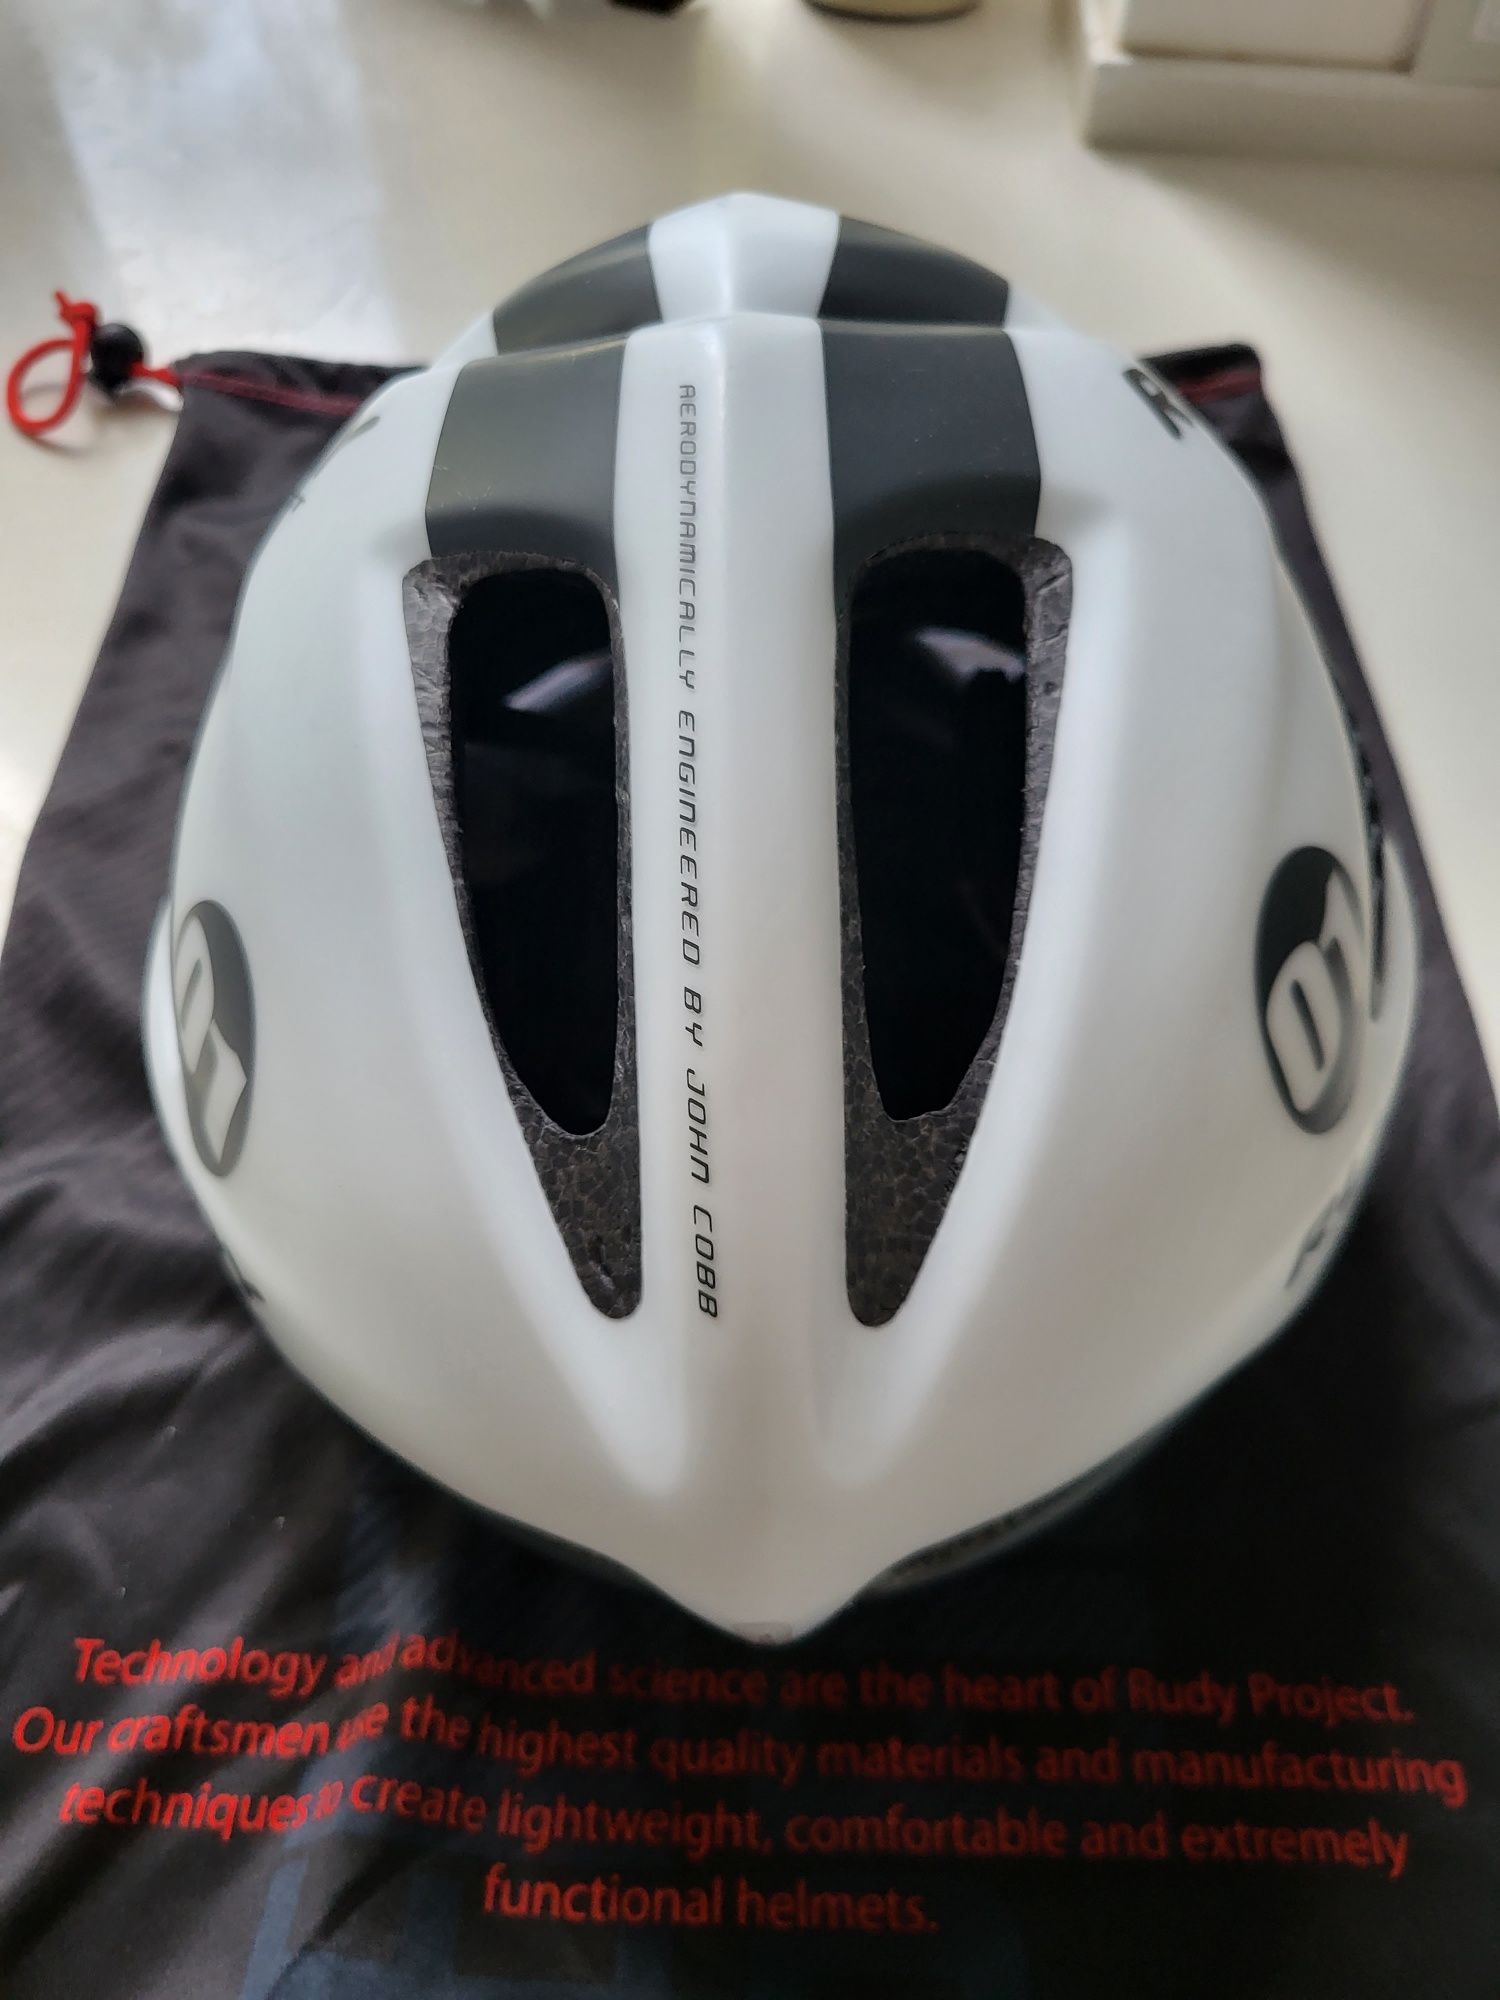 Kask rowerowy Rudy Project